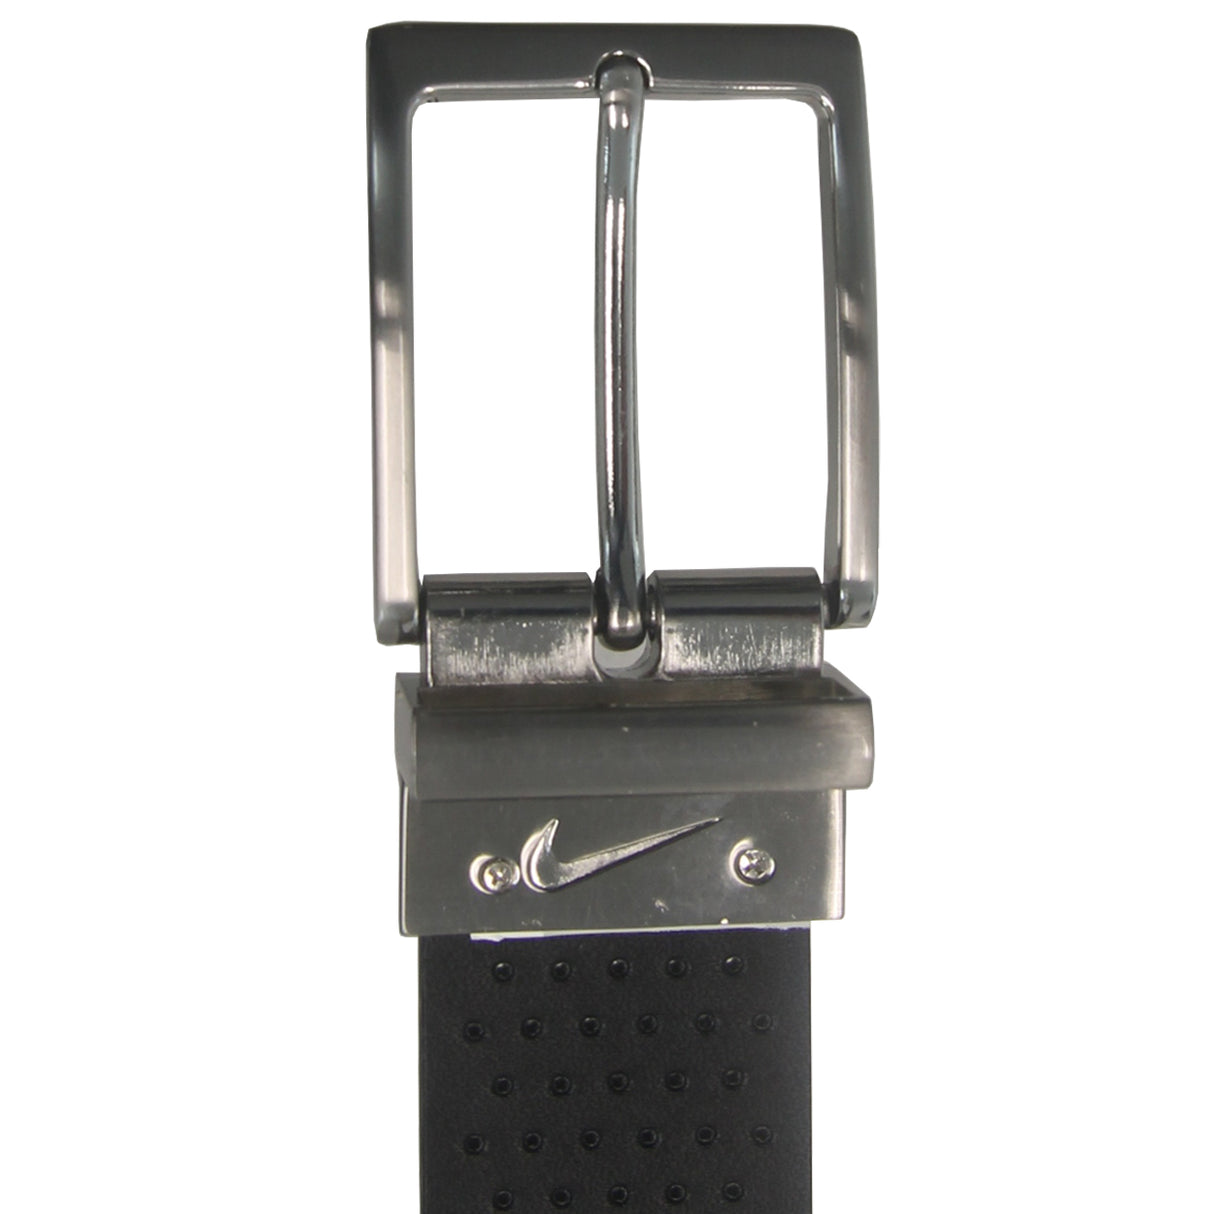 Nike Golf Men's Perforated Strap Leather Reversible Belt